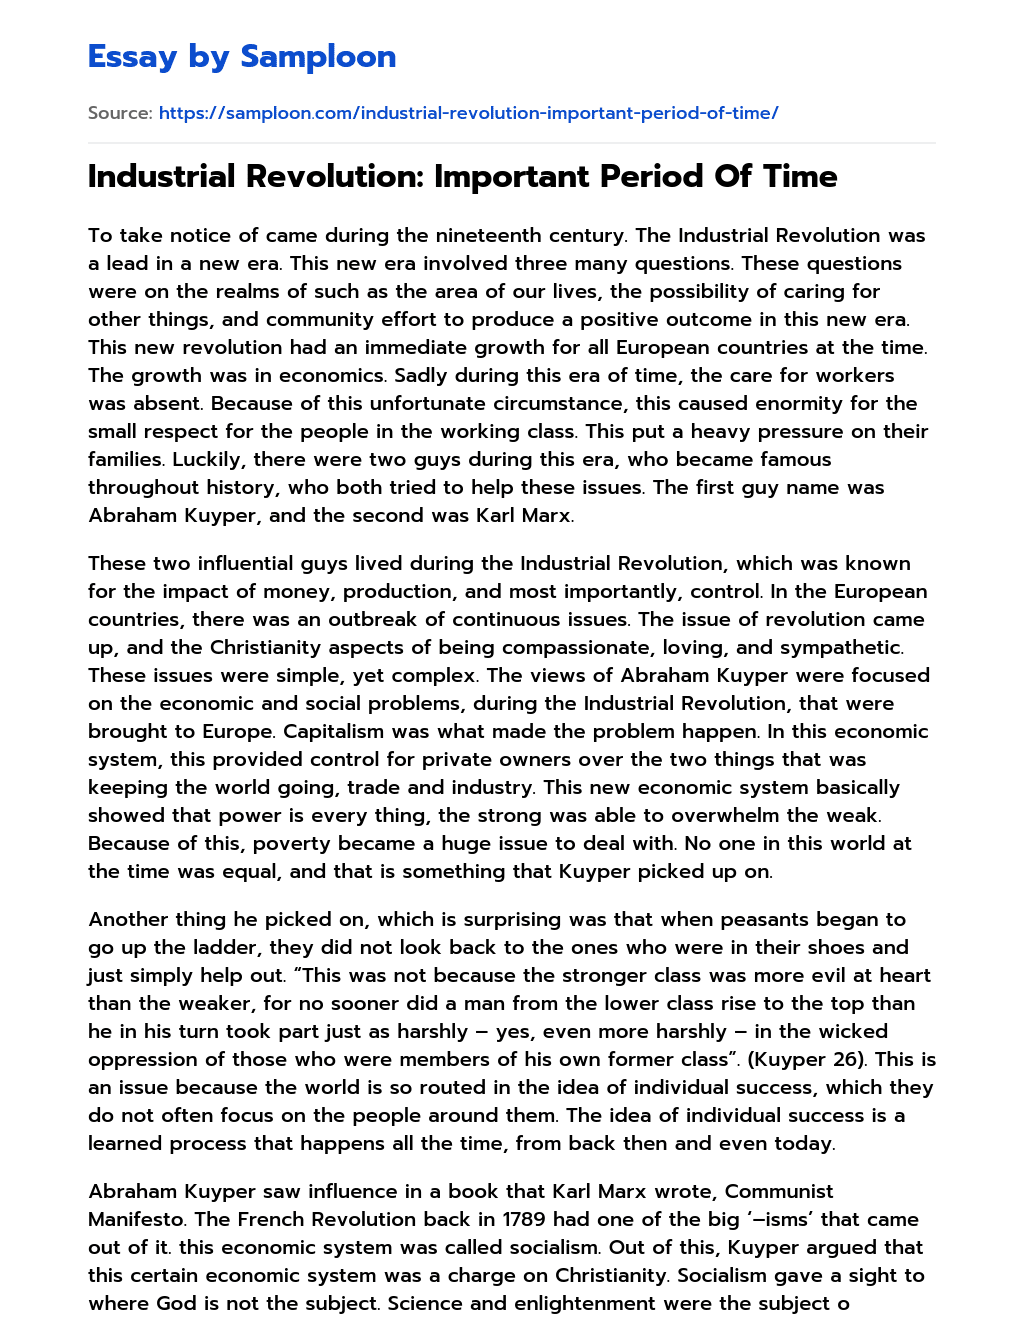 Industrial Revolution: Important Period Of Time essay